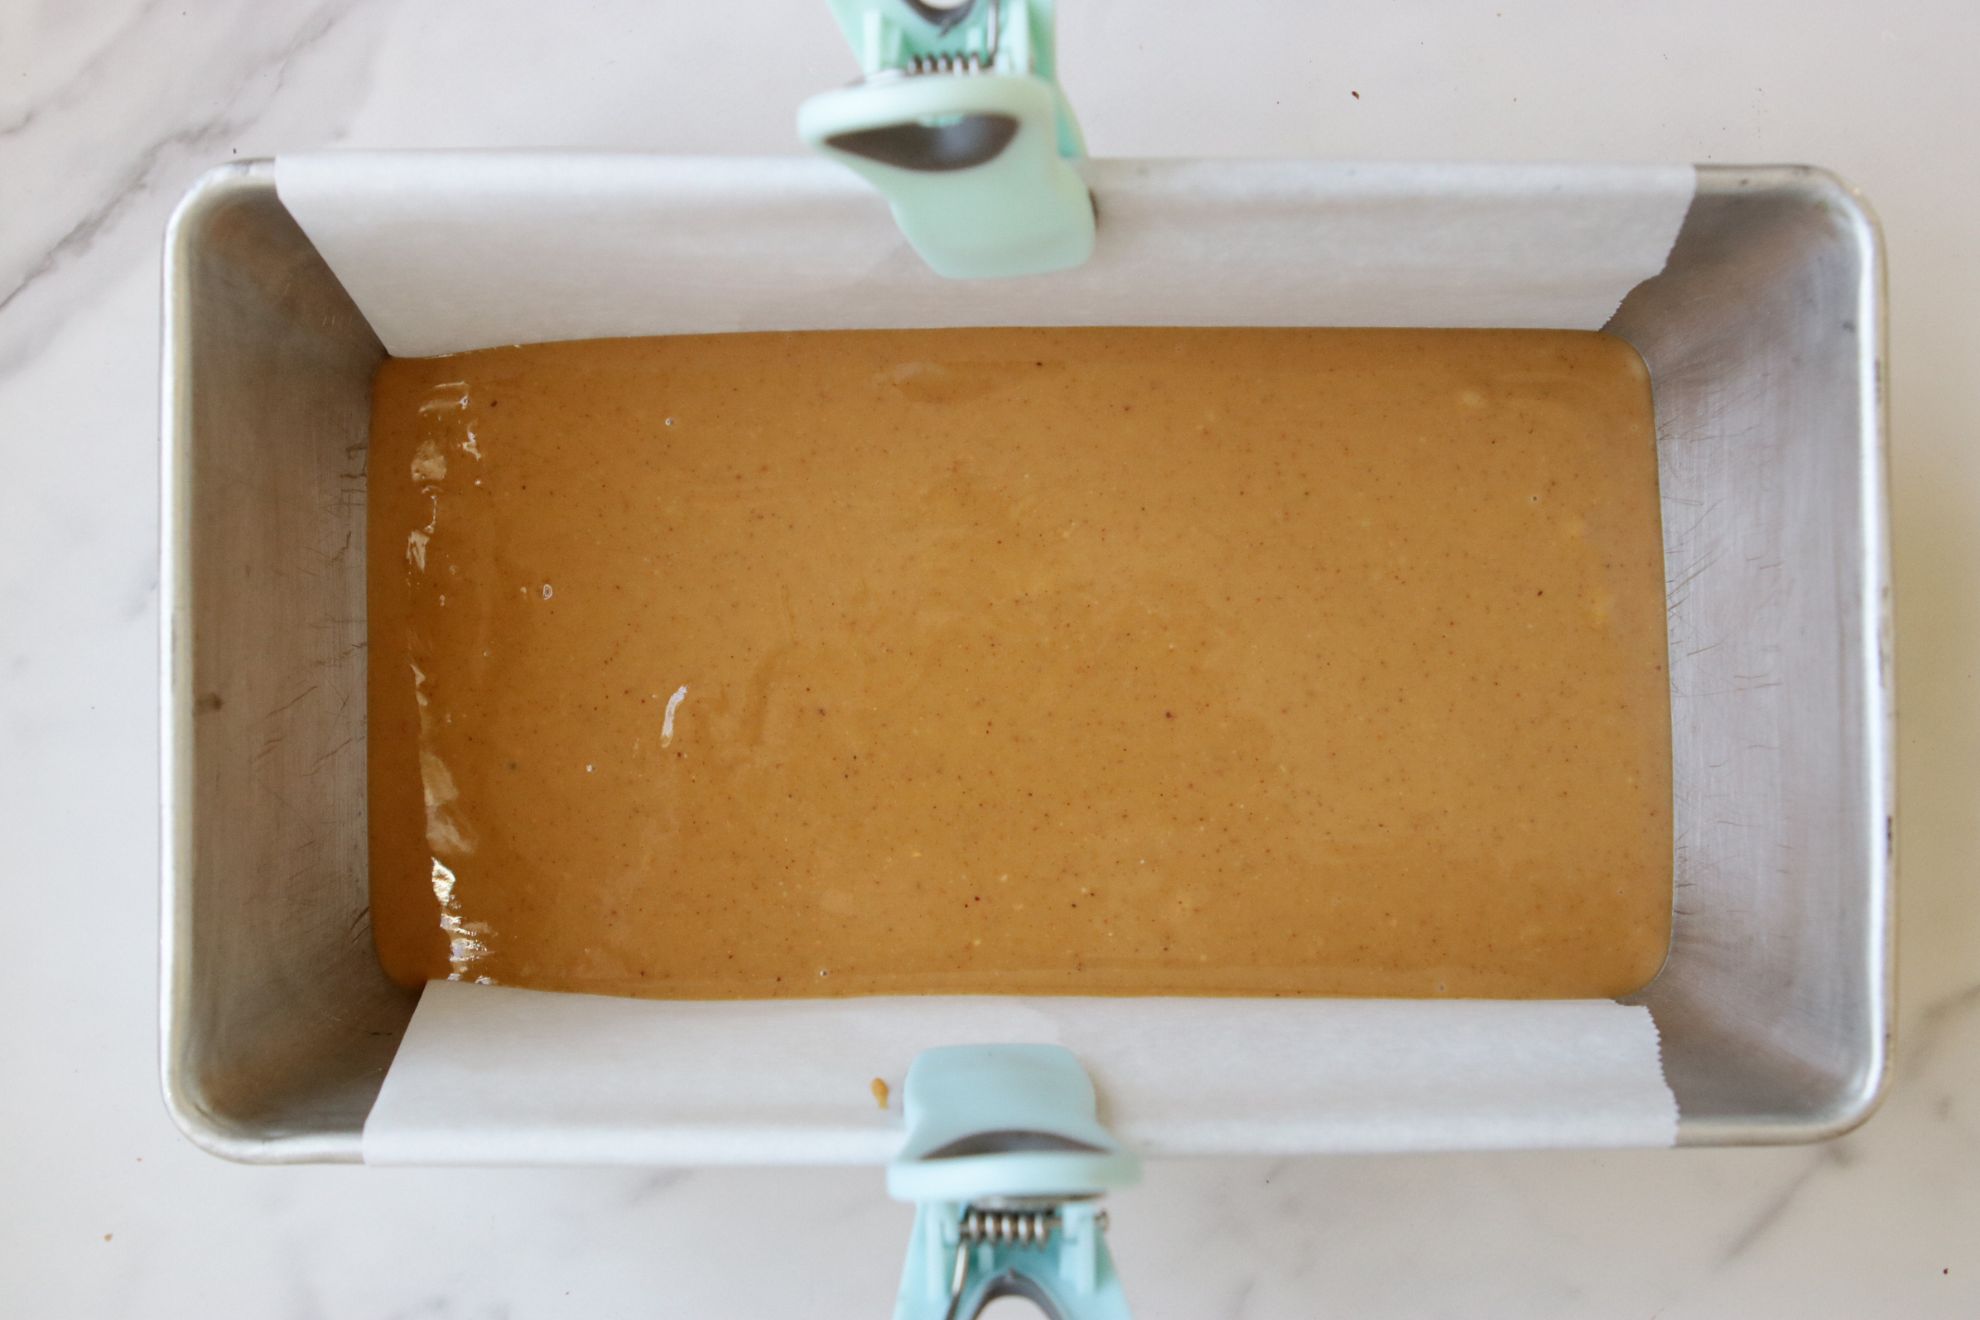 This is an overhead horizontal image of a bread pan lined with parchment paper and secured on the long side of the pan with light blue and green plastic chip clips. In the pan is a melty peanut butter mixture. The pan sits on a white marble counter.